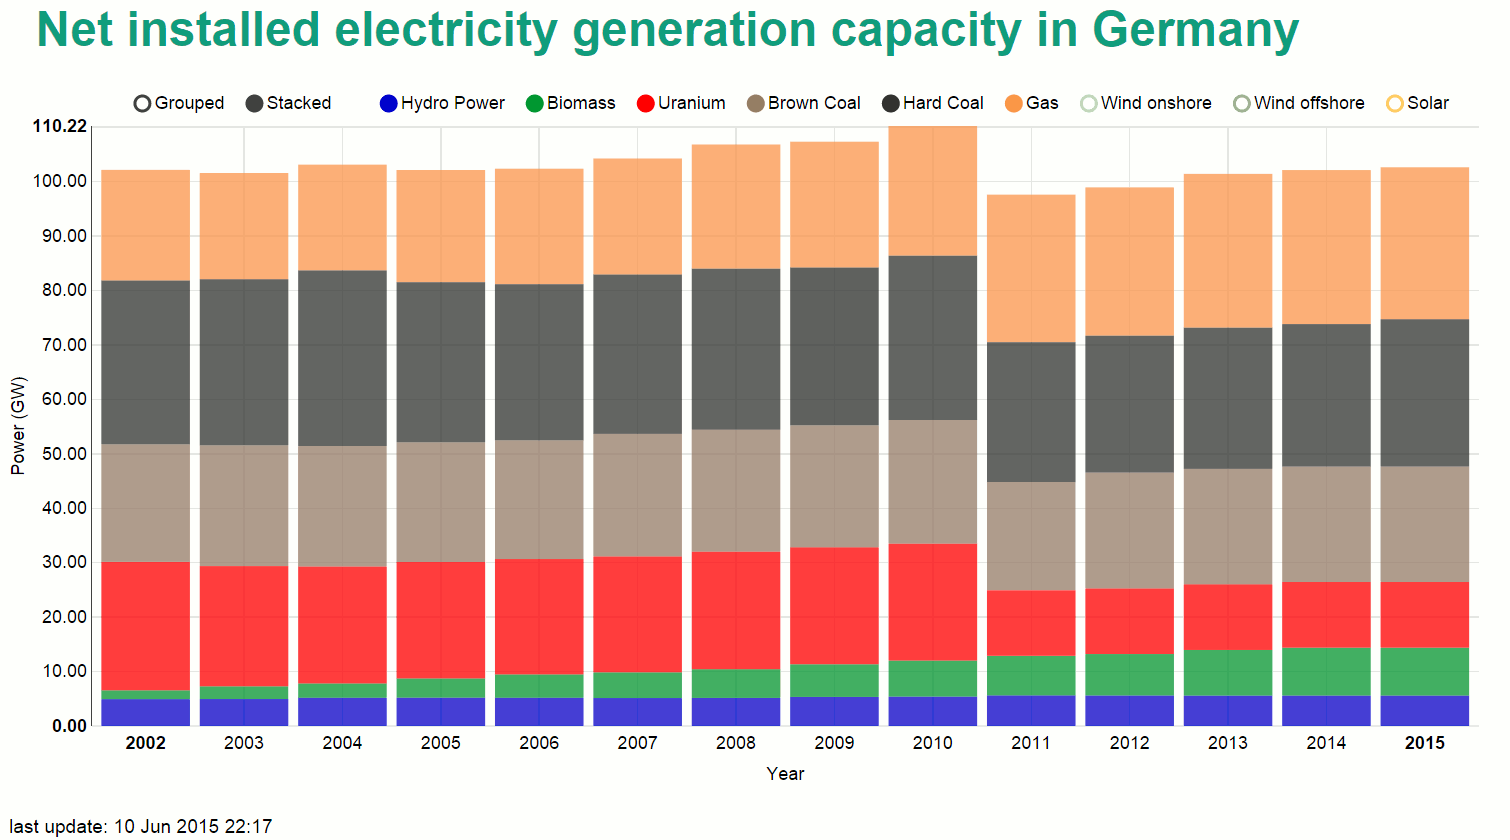 Net installed electricity generation capacity in Germany